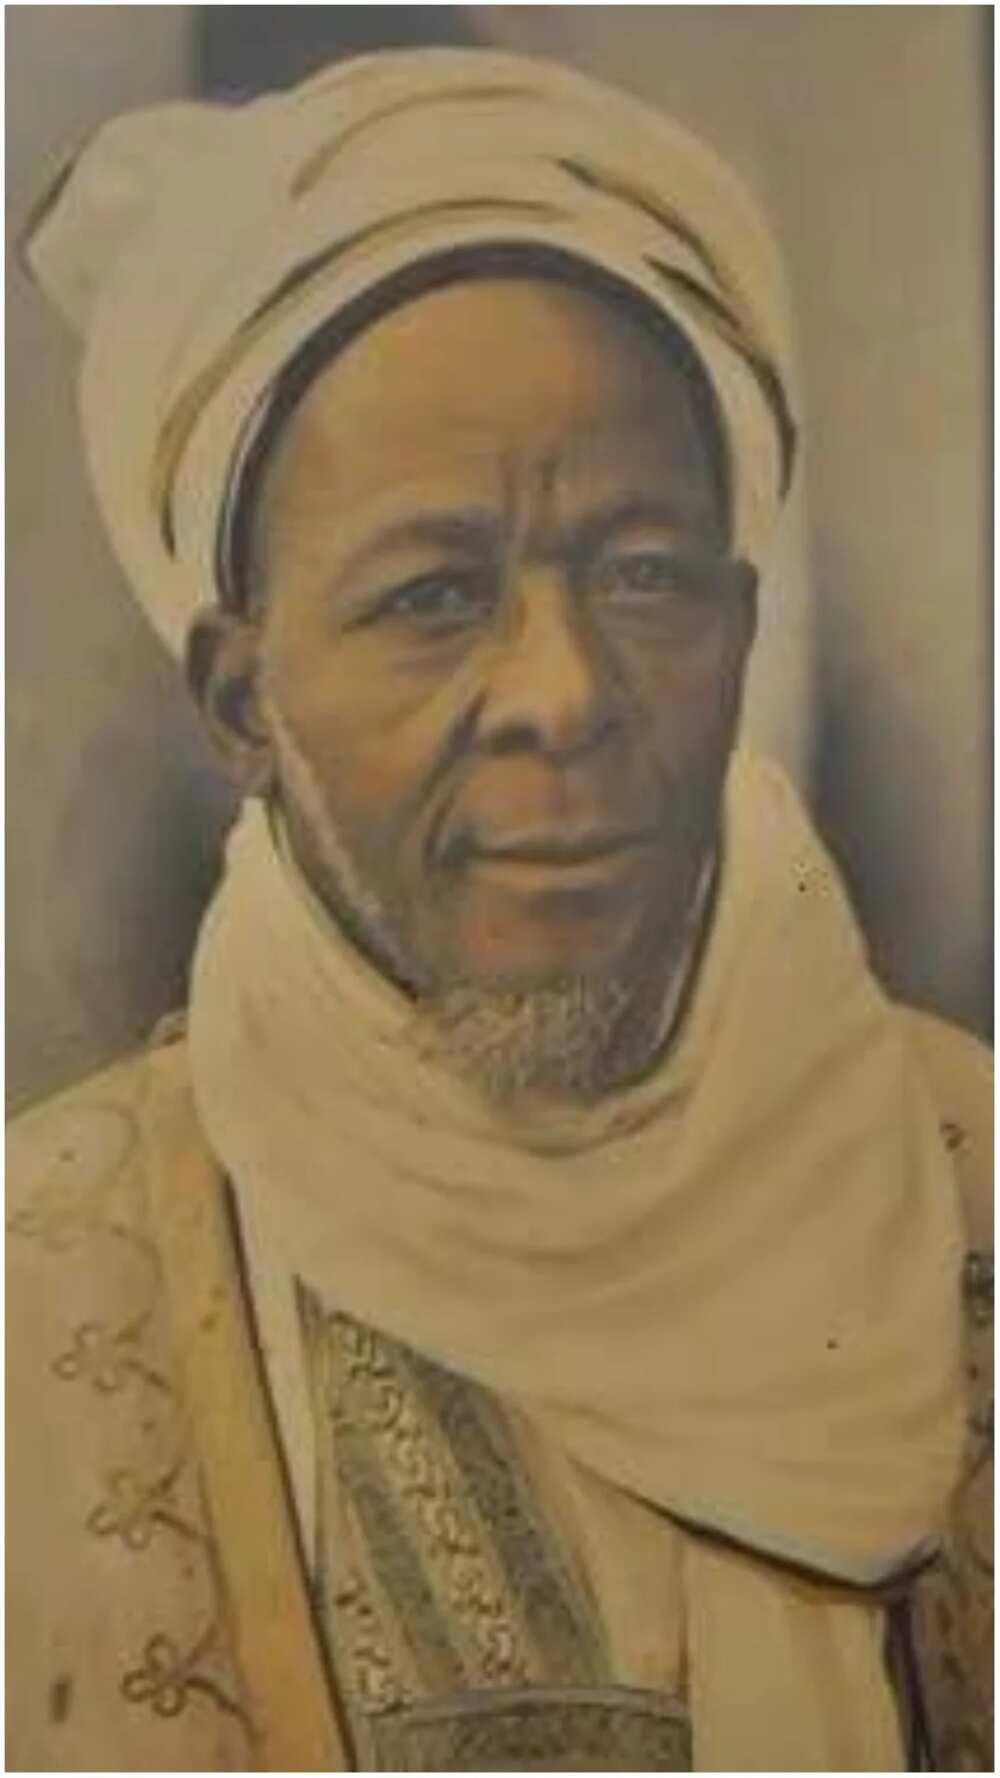 19 facts to know about Muhammadu Aminu Sambo, first western educated person in Zaria